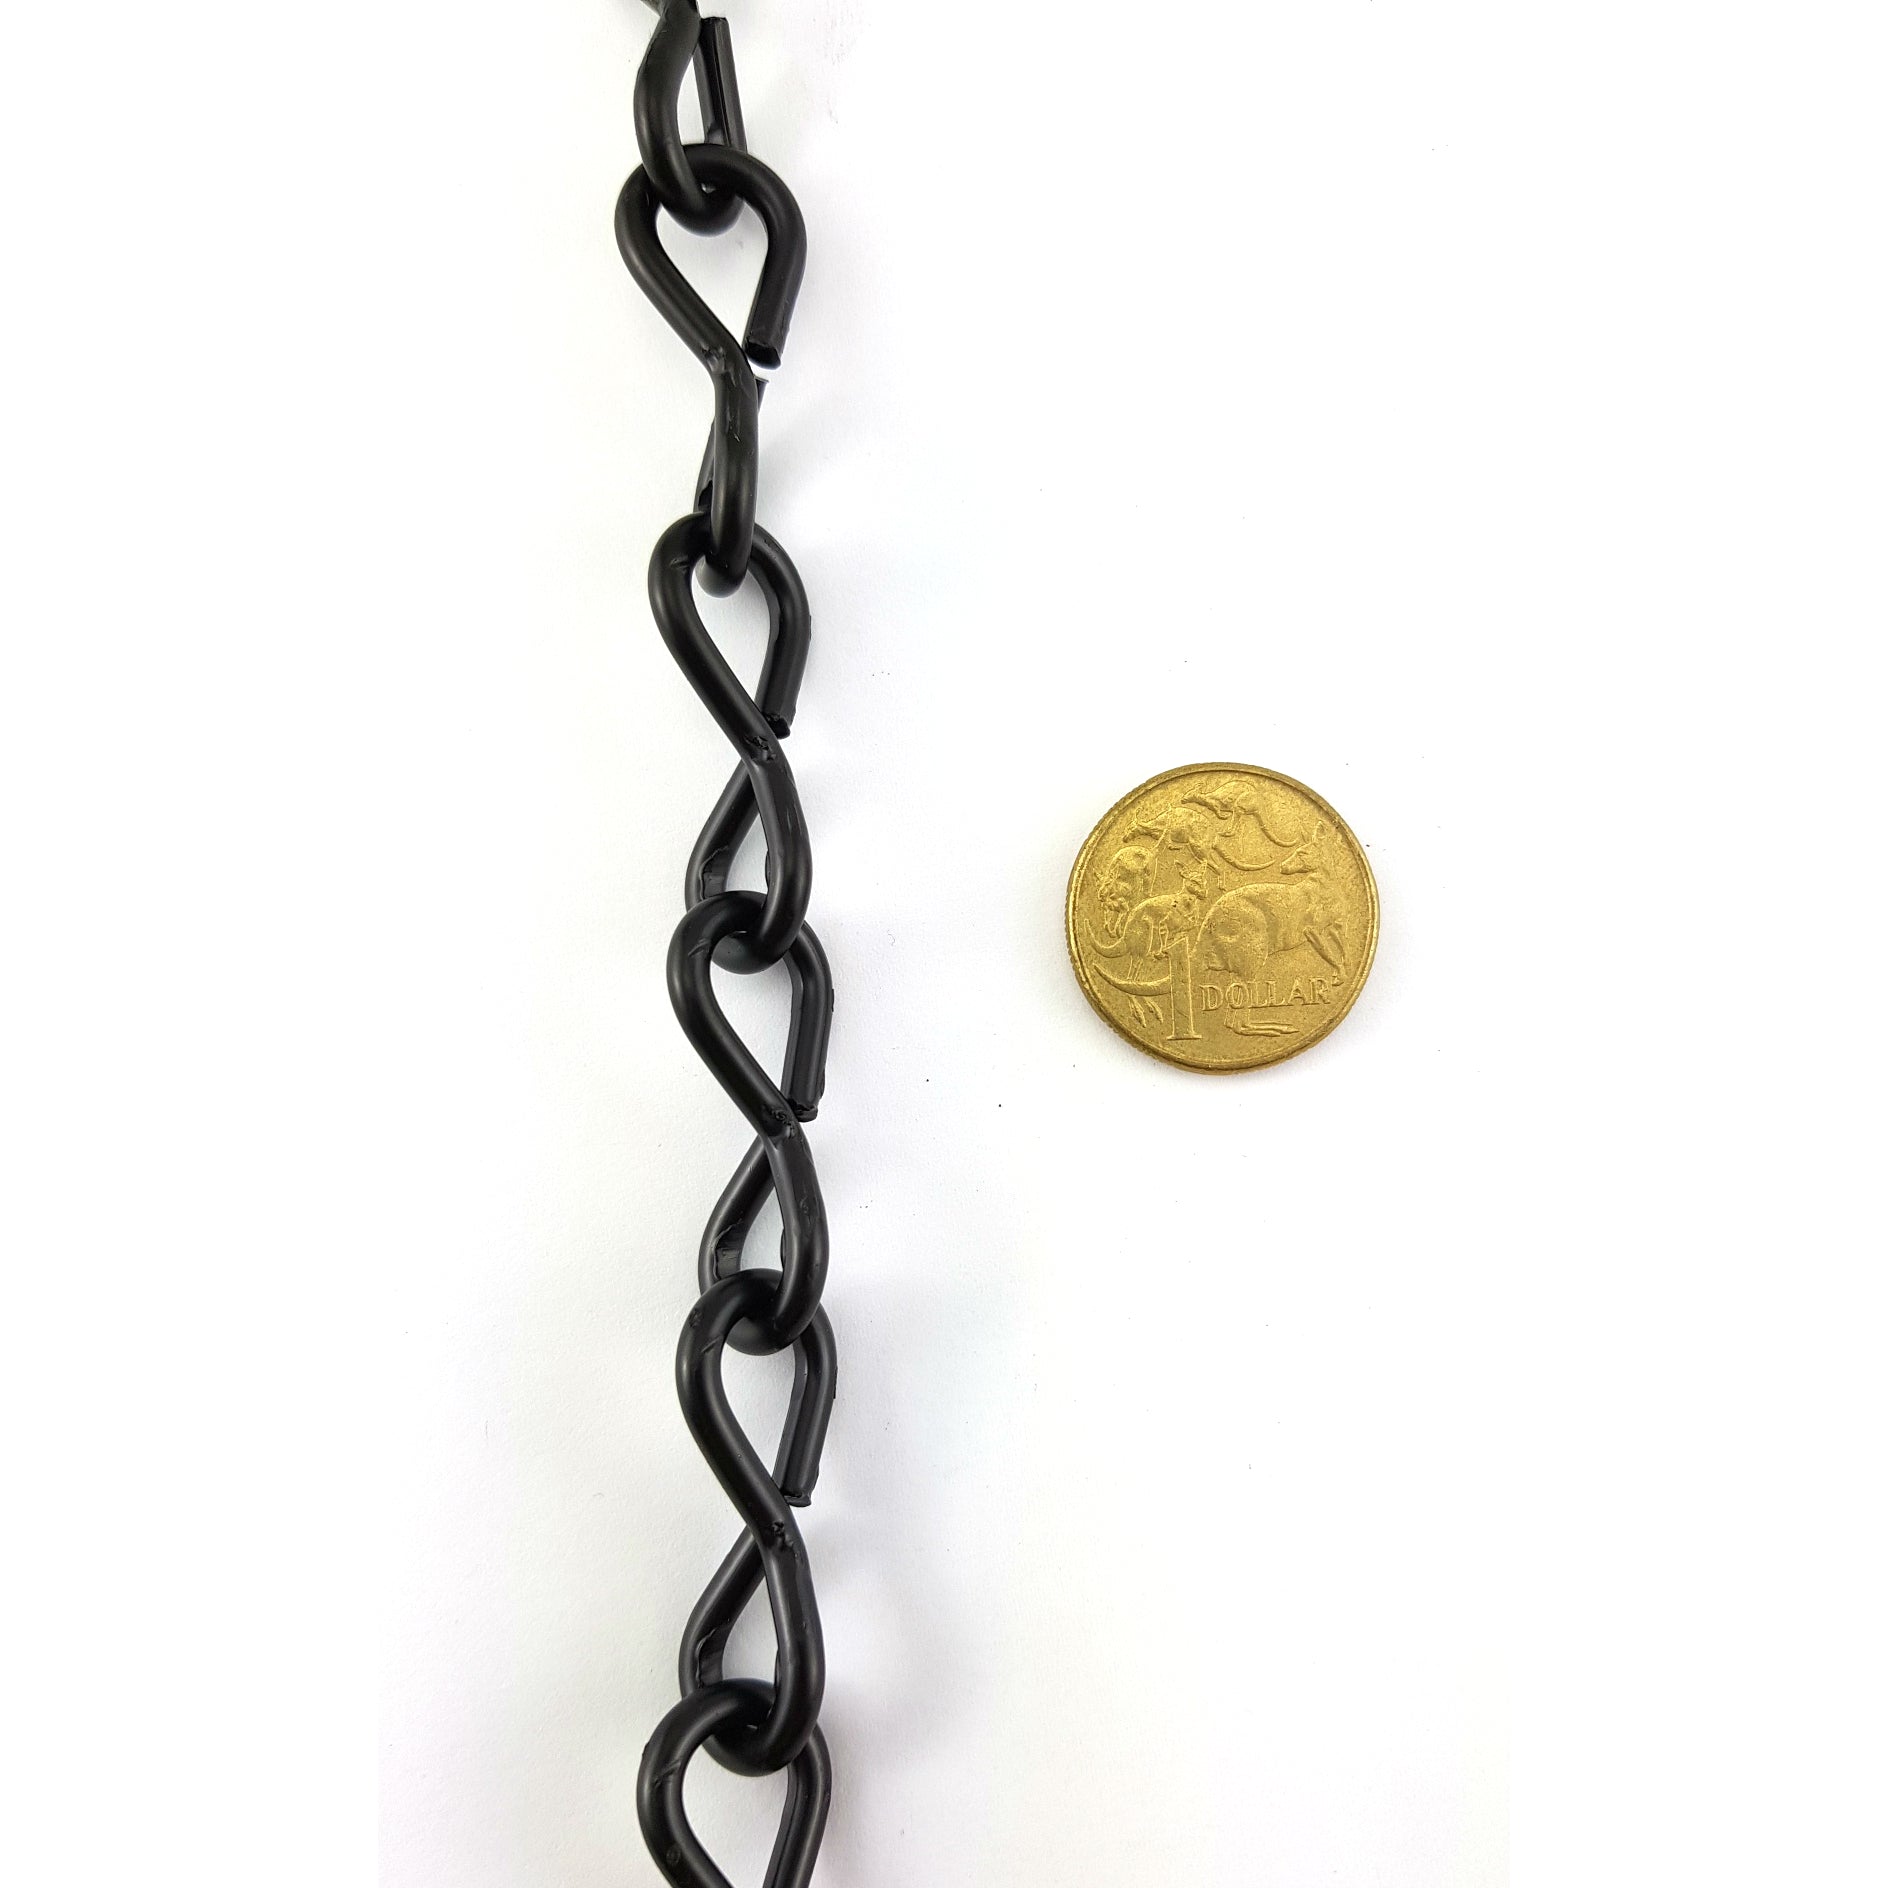 Commercial Jack Chain in Black powder coated finish, size: 3.2mm, in a quantity of 30 metres. Melbourne, Australia.